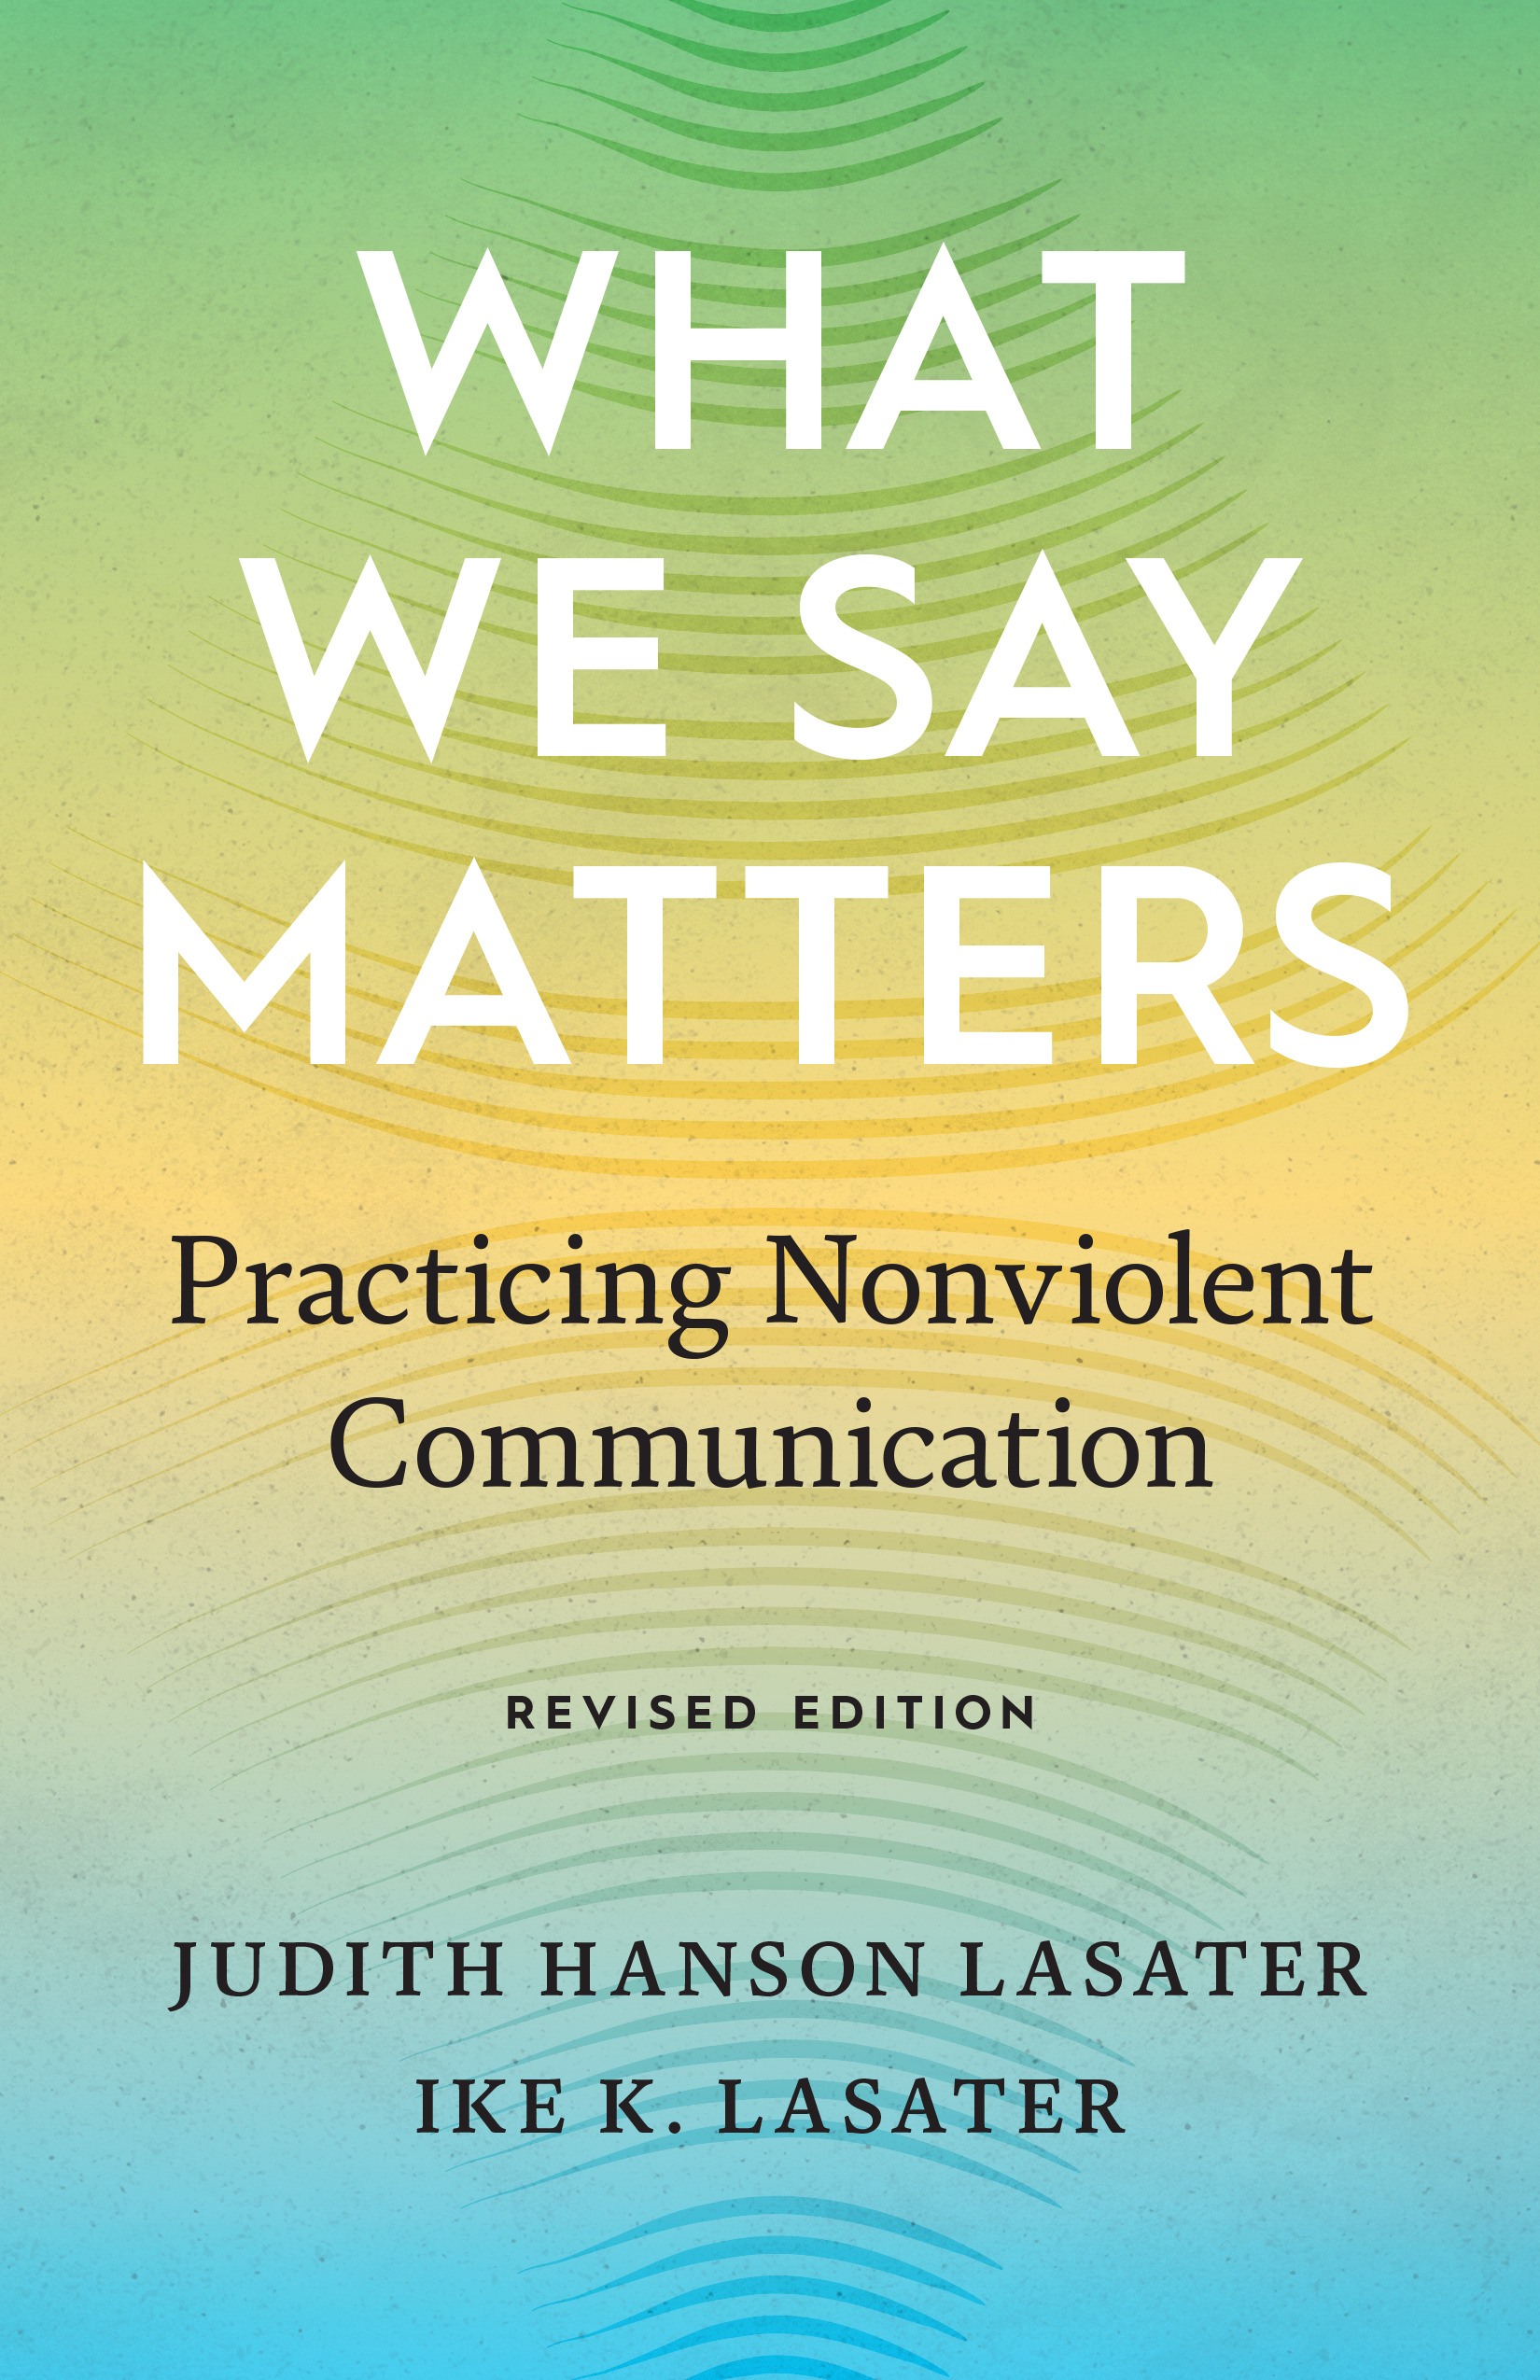 What We Say Matters : Practicing Nonviolent Communication | Psychology & Self-Improvement